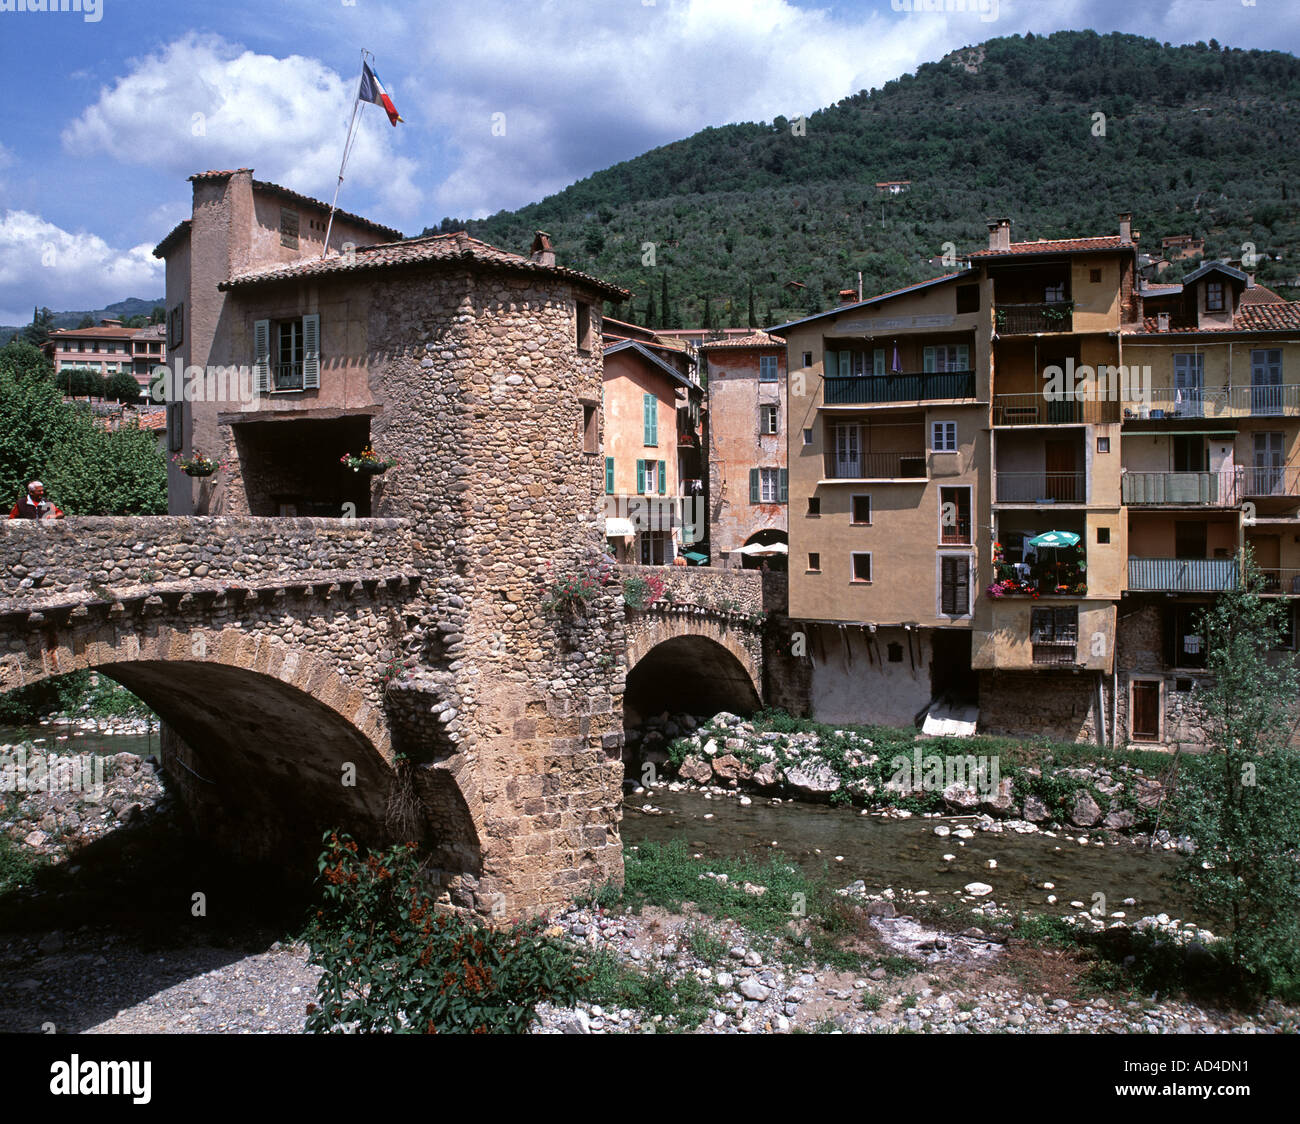 The 11th Century fortified bridge at the mountain resort of Sospel Stock Photo